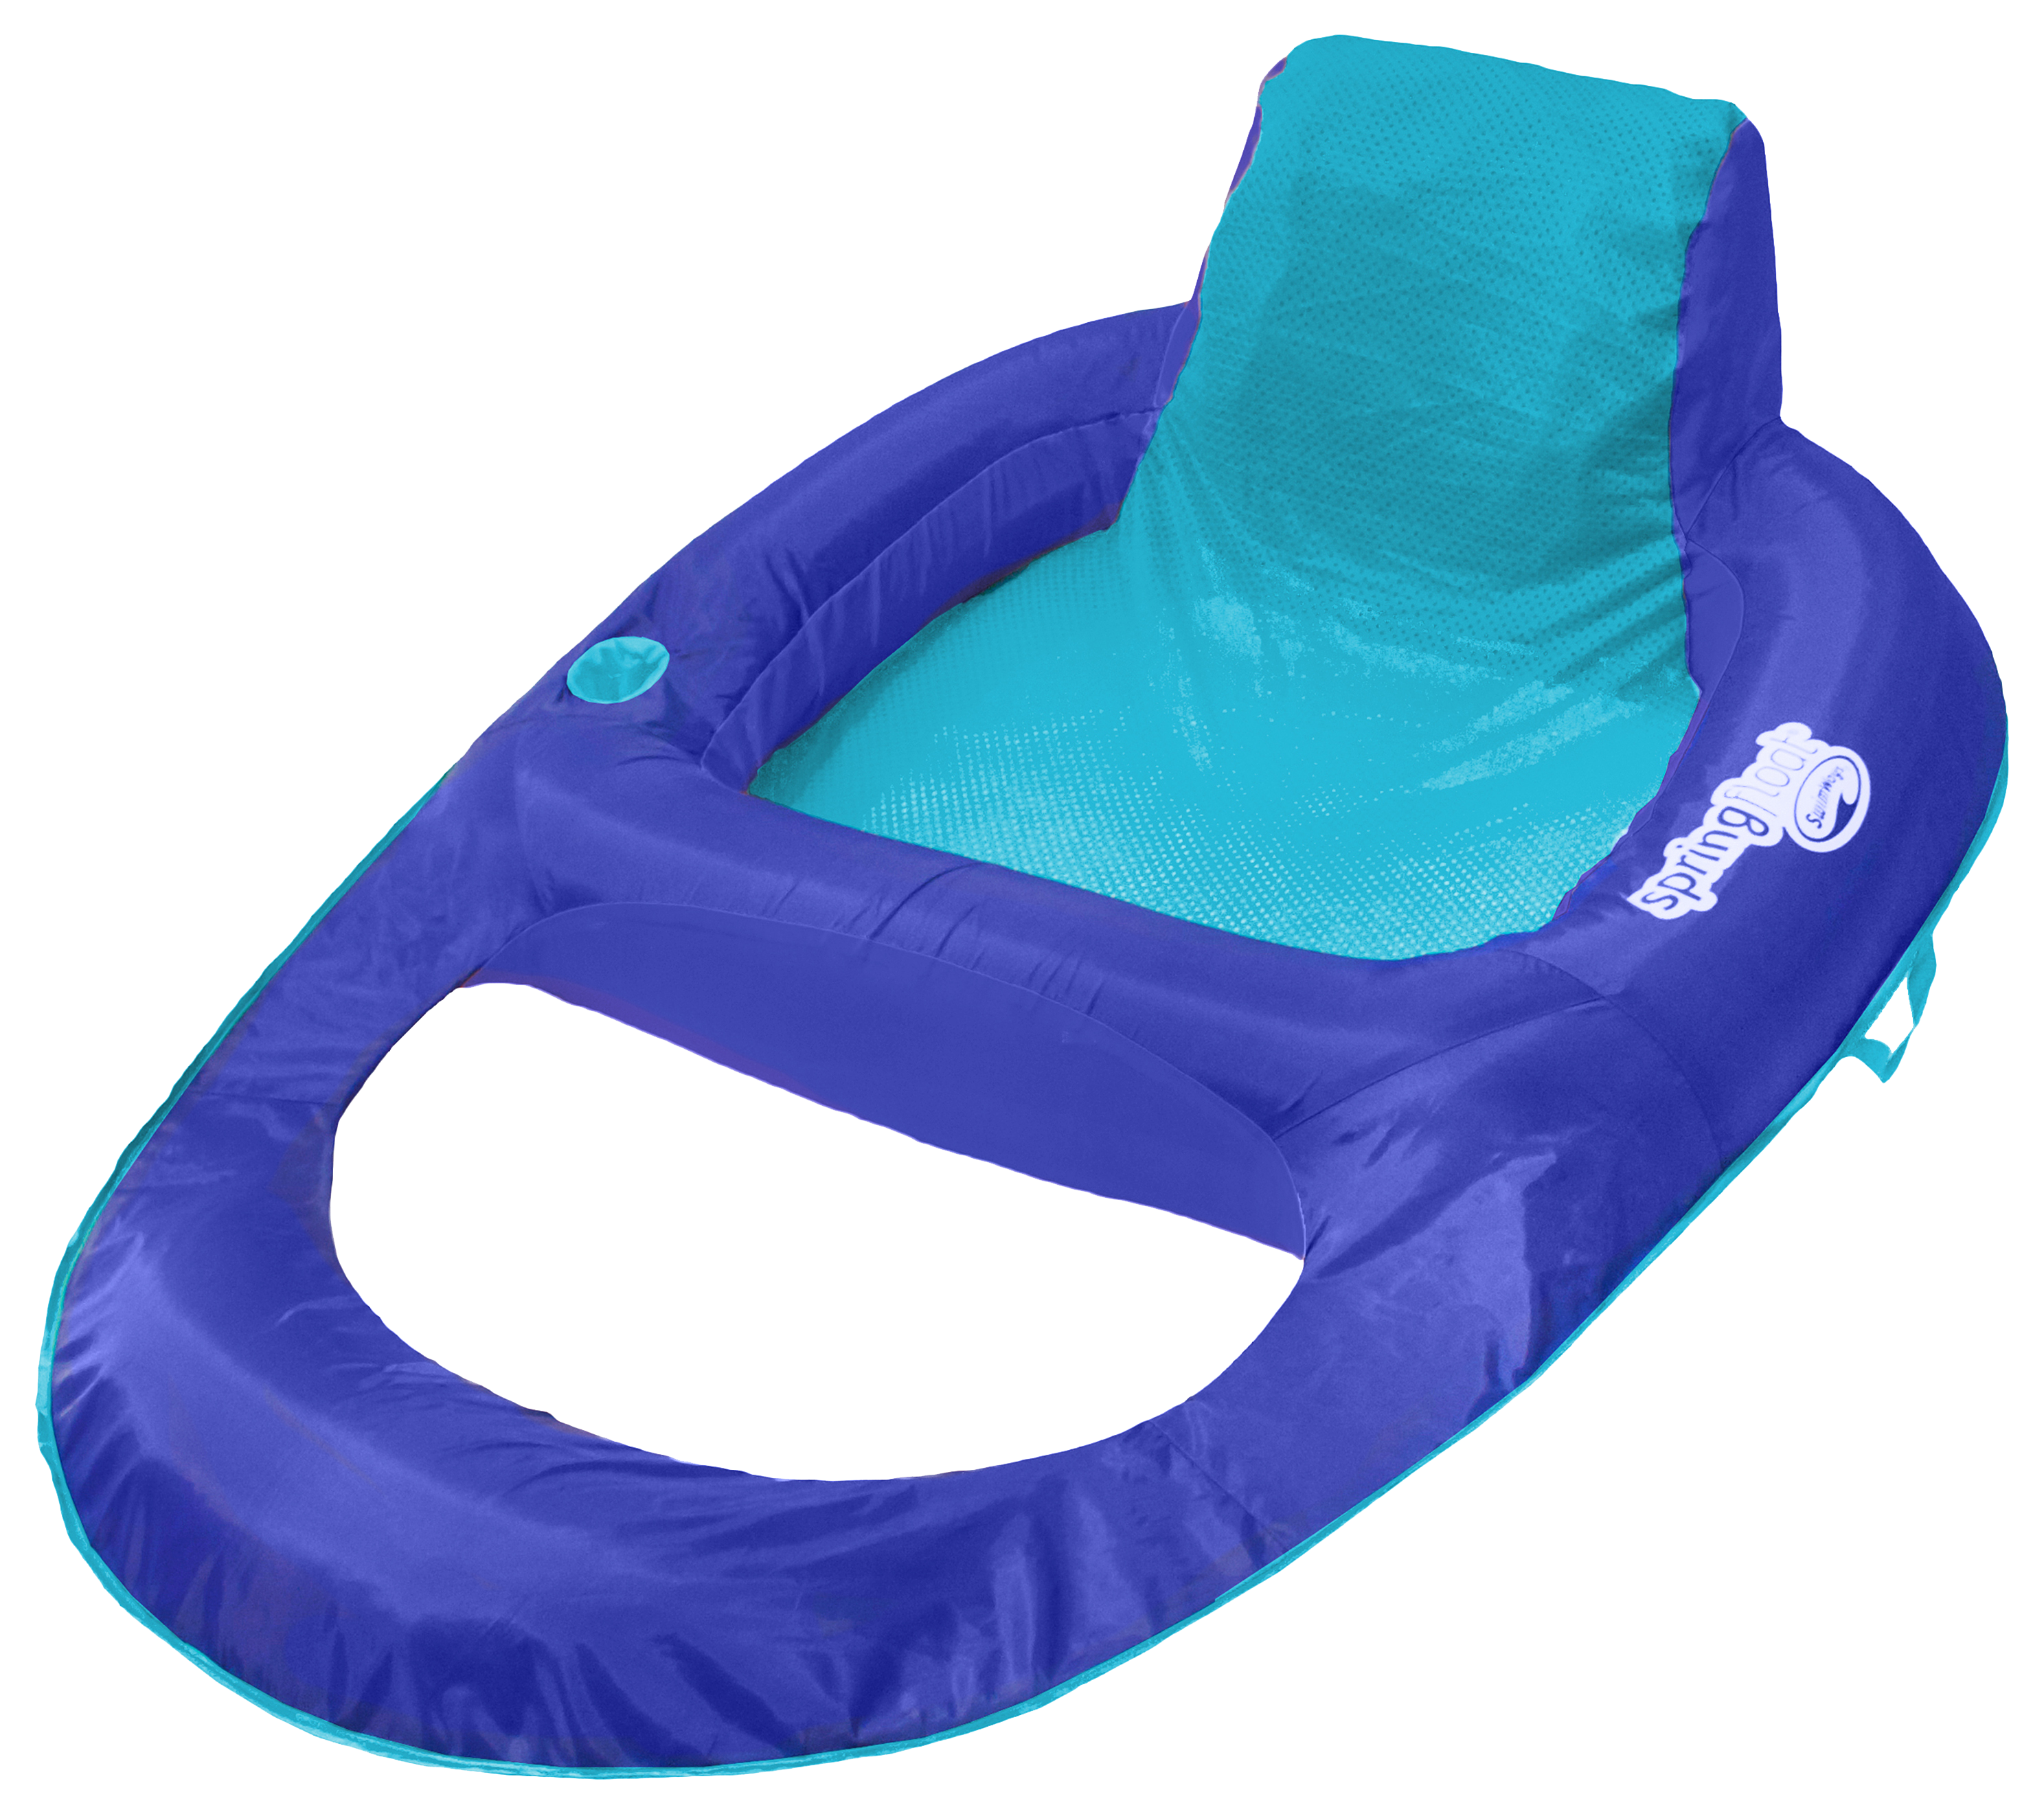 SwimWays Spring Float Recliner Inflatable Pool Lounger with Hyper-Flate Valve - 61""L x 44""W x 20""H